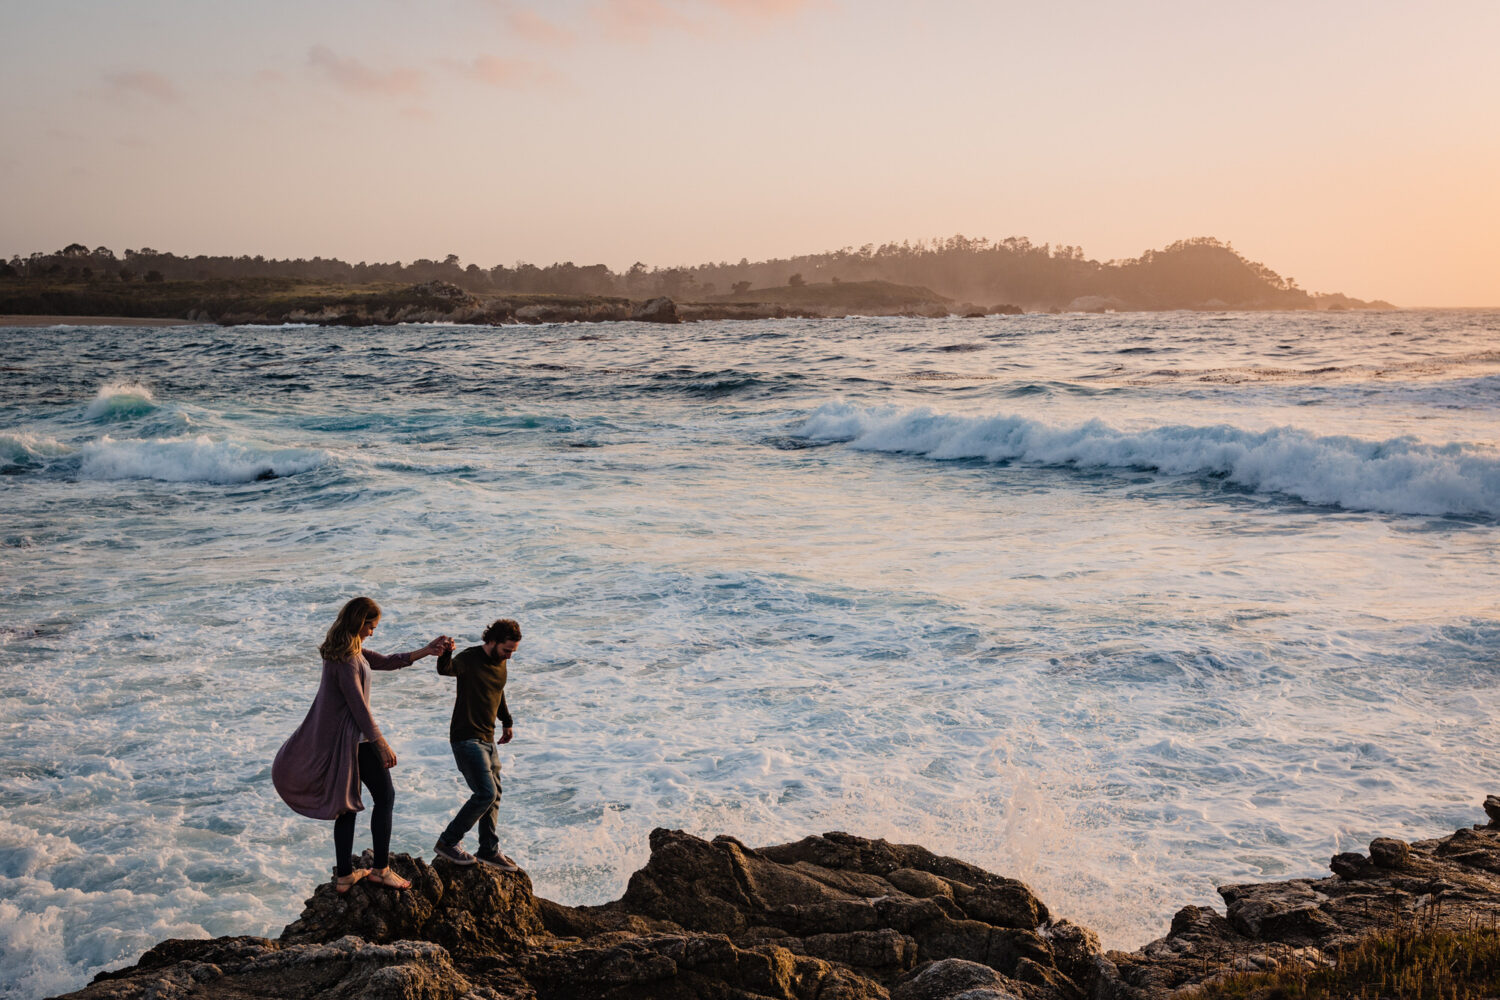 Walking hand-in-hand along a rocky shoreline during a Carmel engagement photoshoot with the ocean in the background.